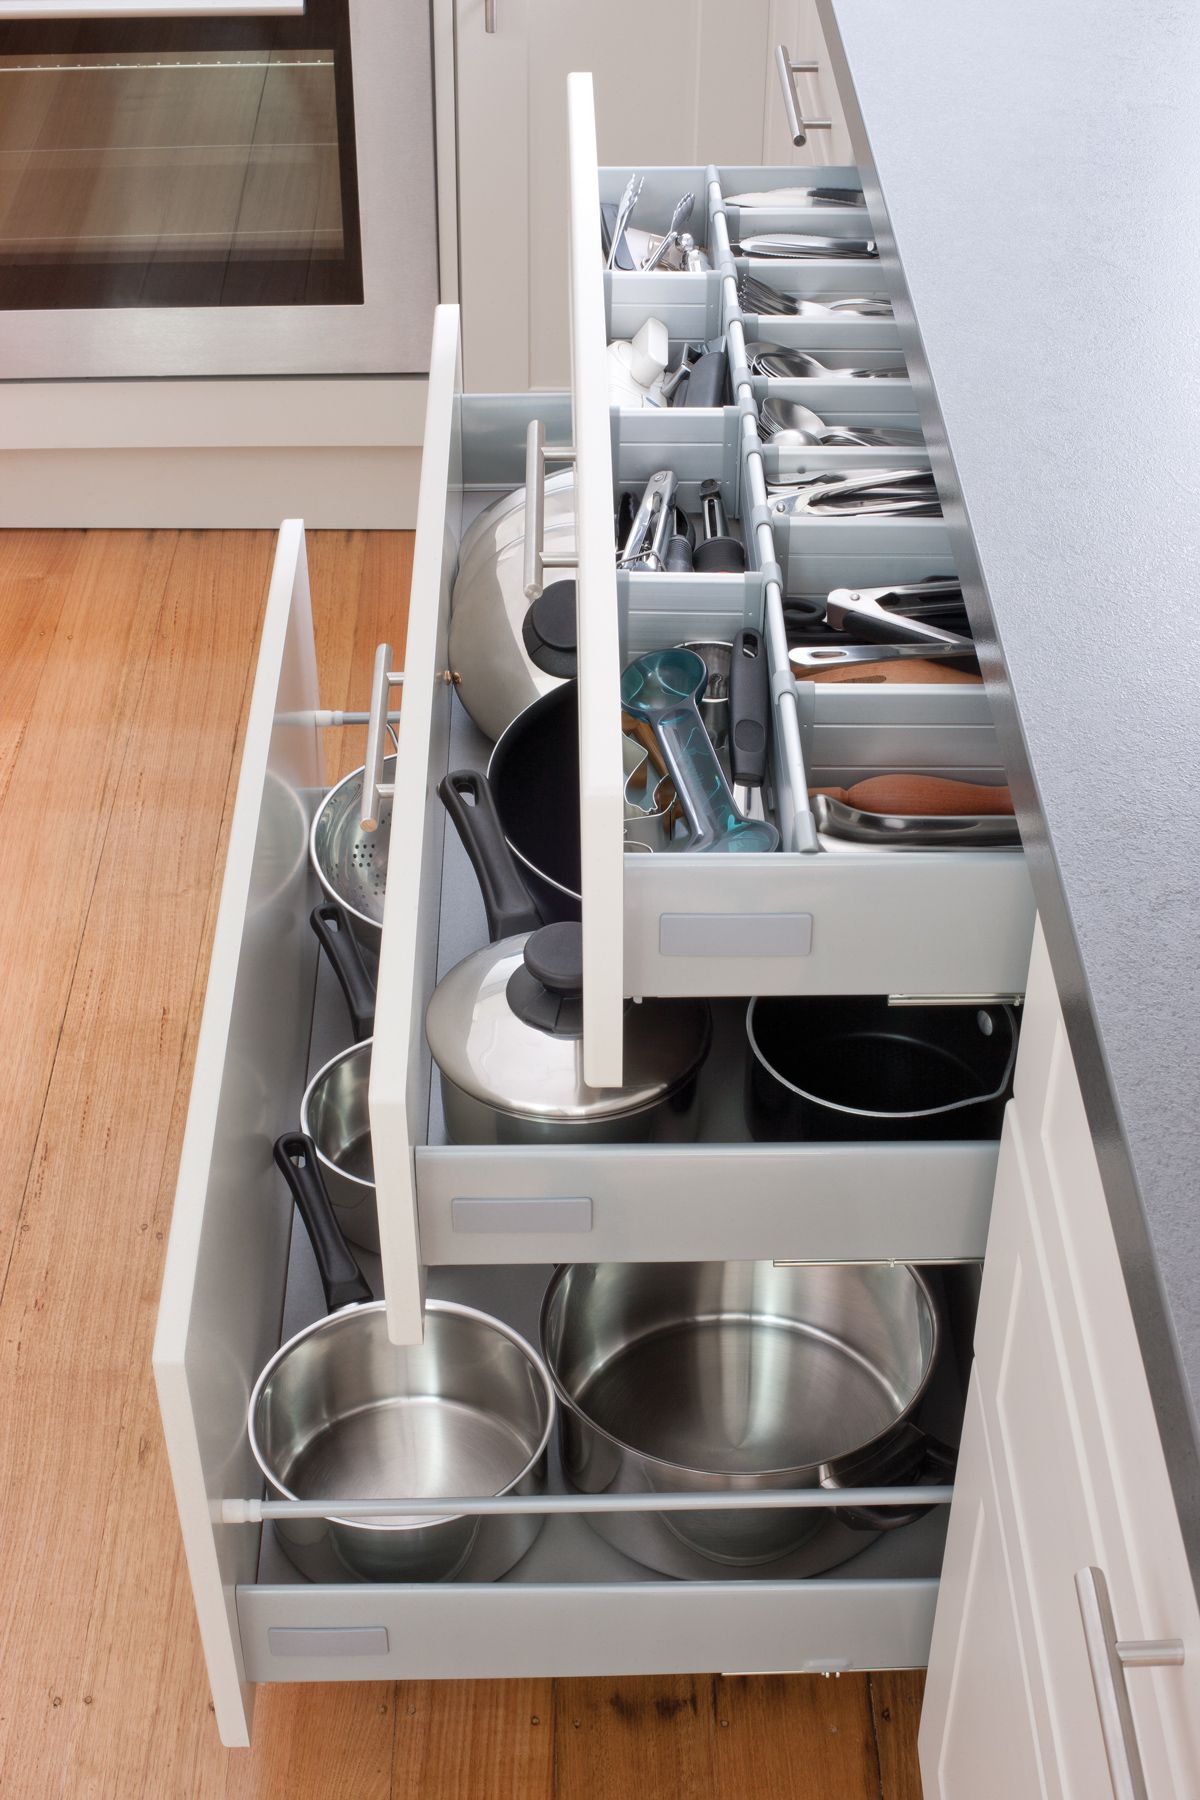 Additional-drawers-are-now-in-demand-kitchen-cabinet-styles-and-layouts